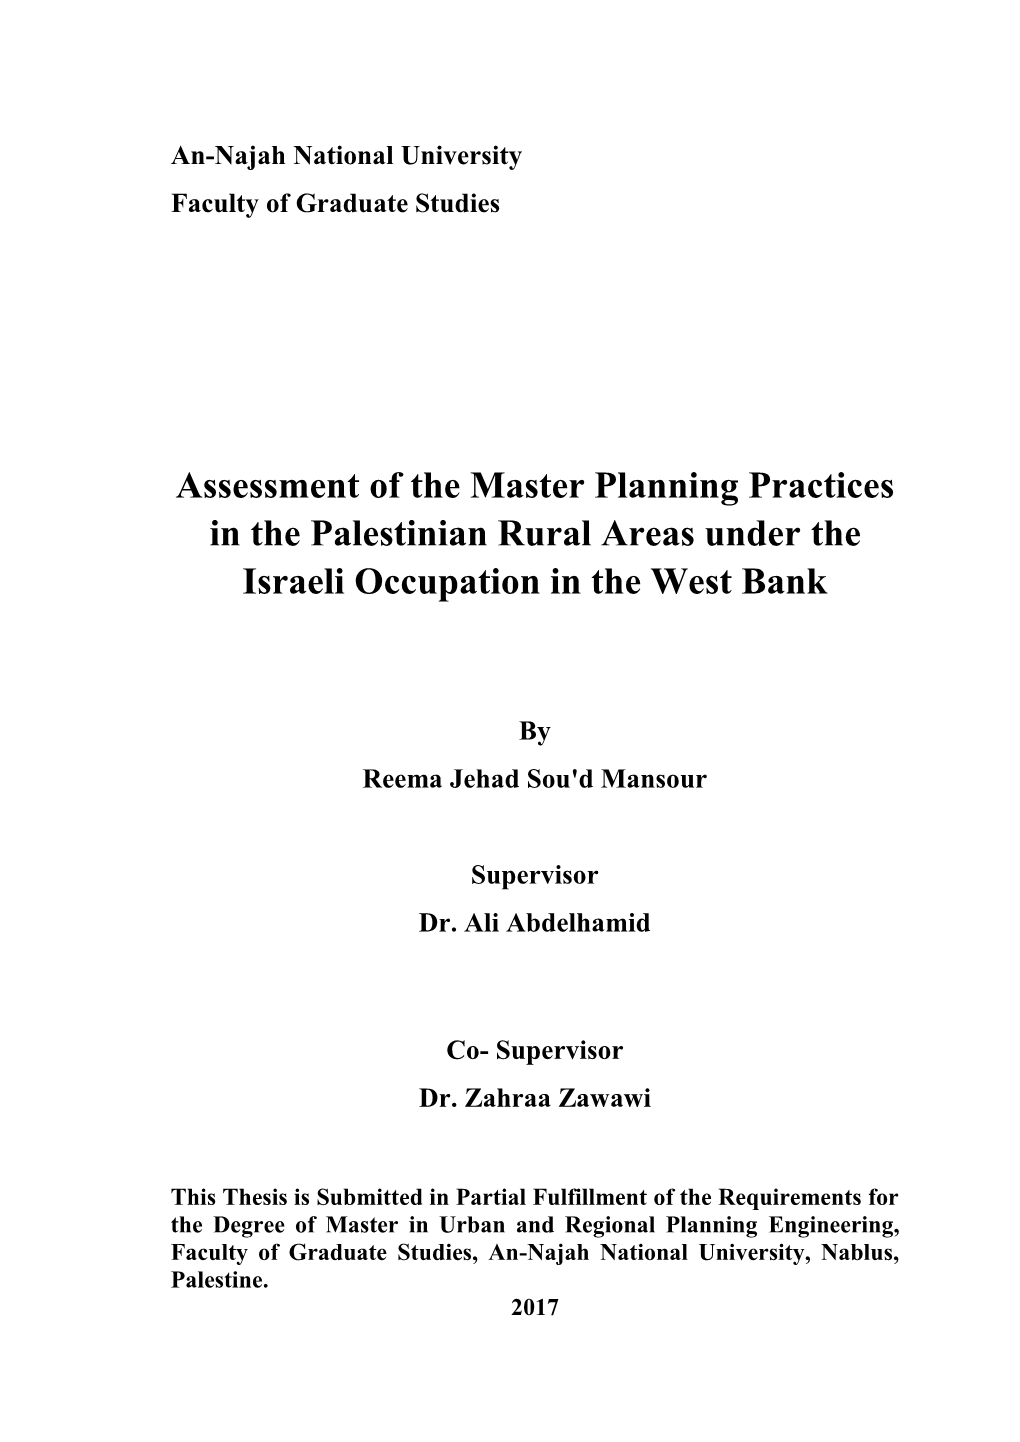 Assessment of the Master Planning Practices in the Palestinian Rural Areas Under the Israeli Occupation in the West Bank